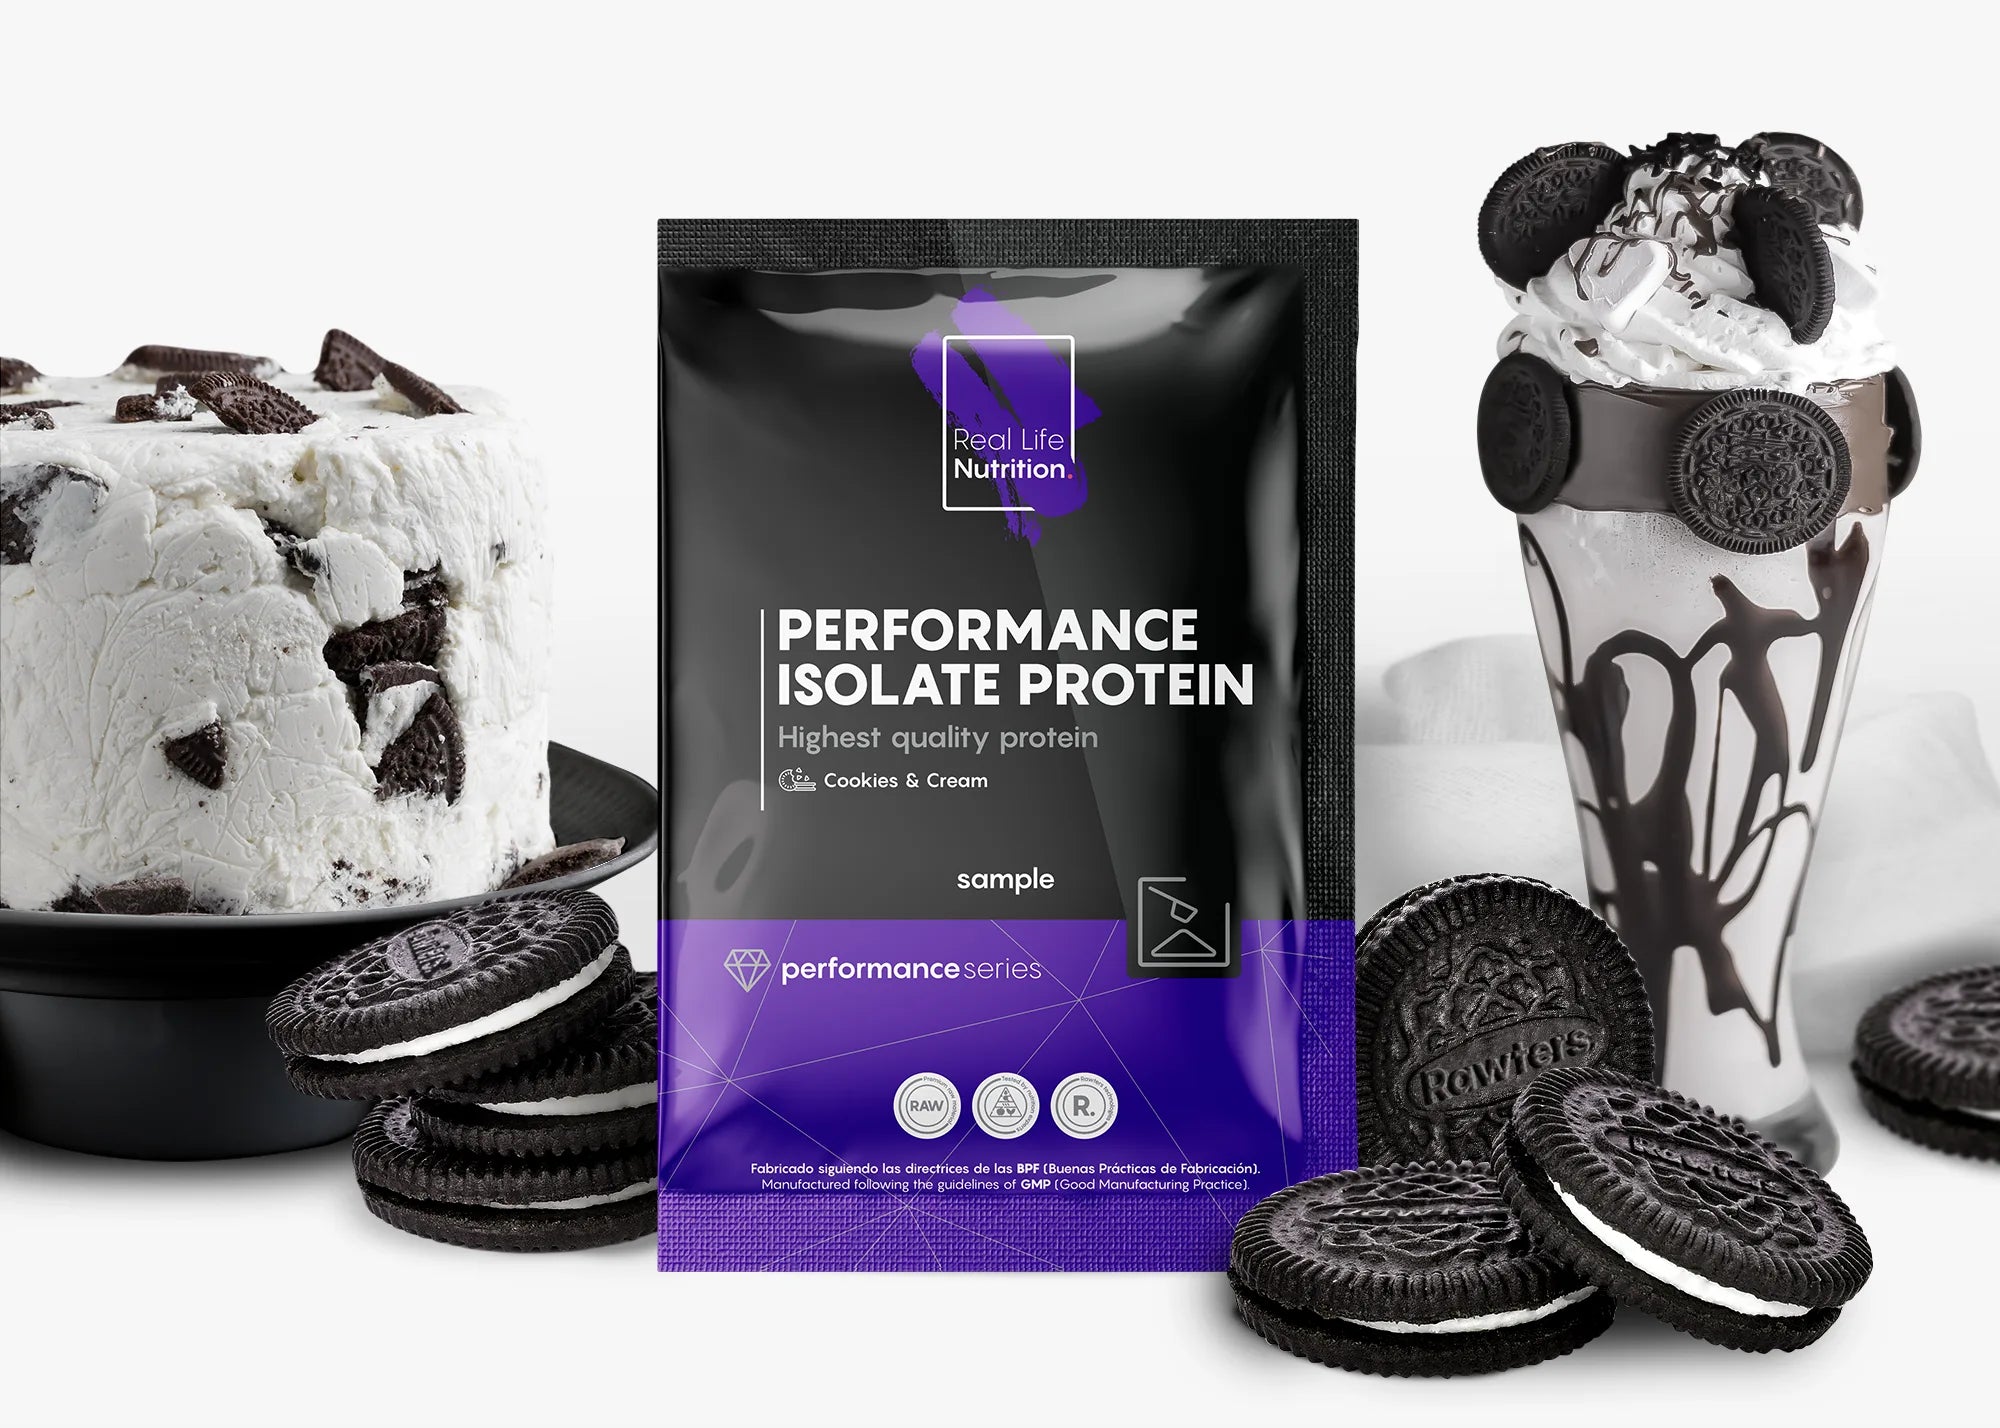 Performance Isolate Protein Cookies and cream